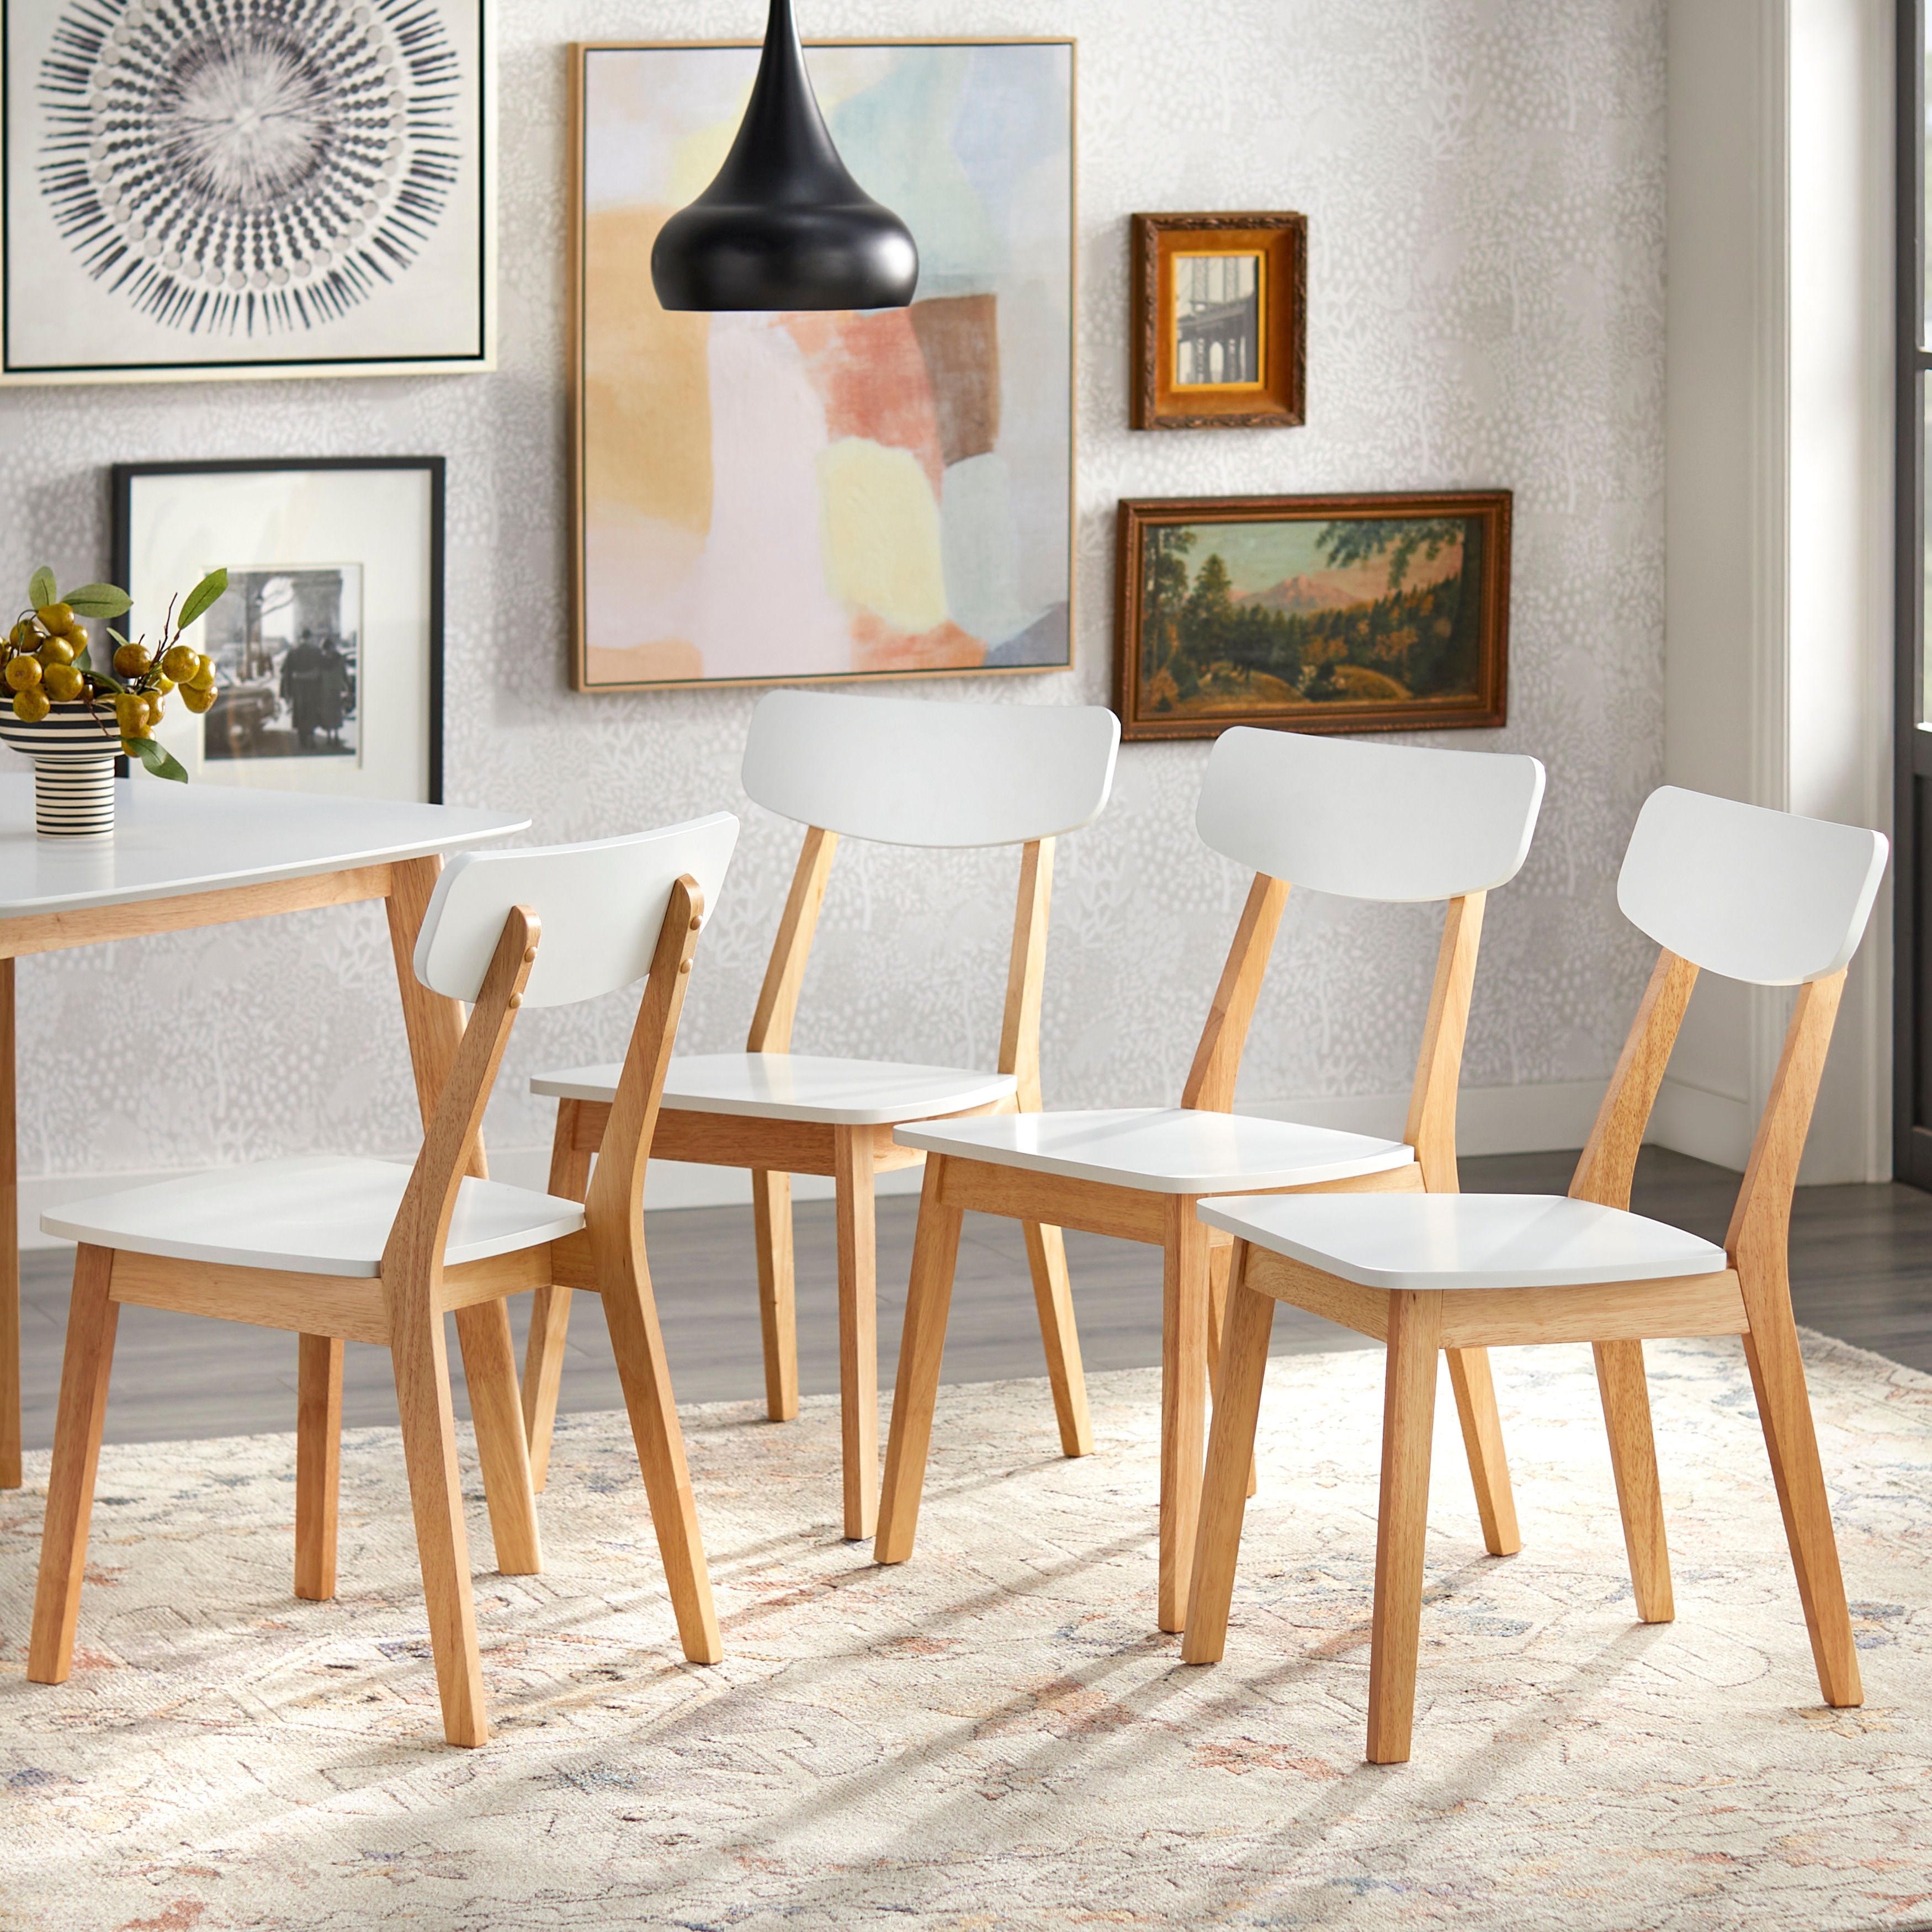 https://ak1.ostkcdn.com/images/products/is/images/direct/80b832ce7e98f28e9c48f40b9ba78b8ff459439a/Simple-Living-Modern-Dining-Chairs-%28Set-of-4%29.jpg